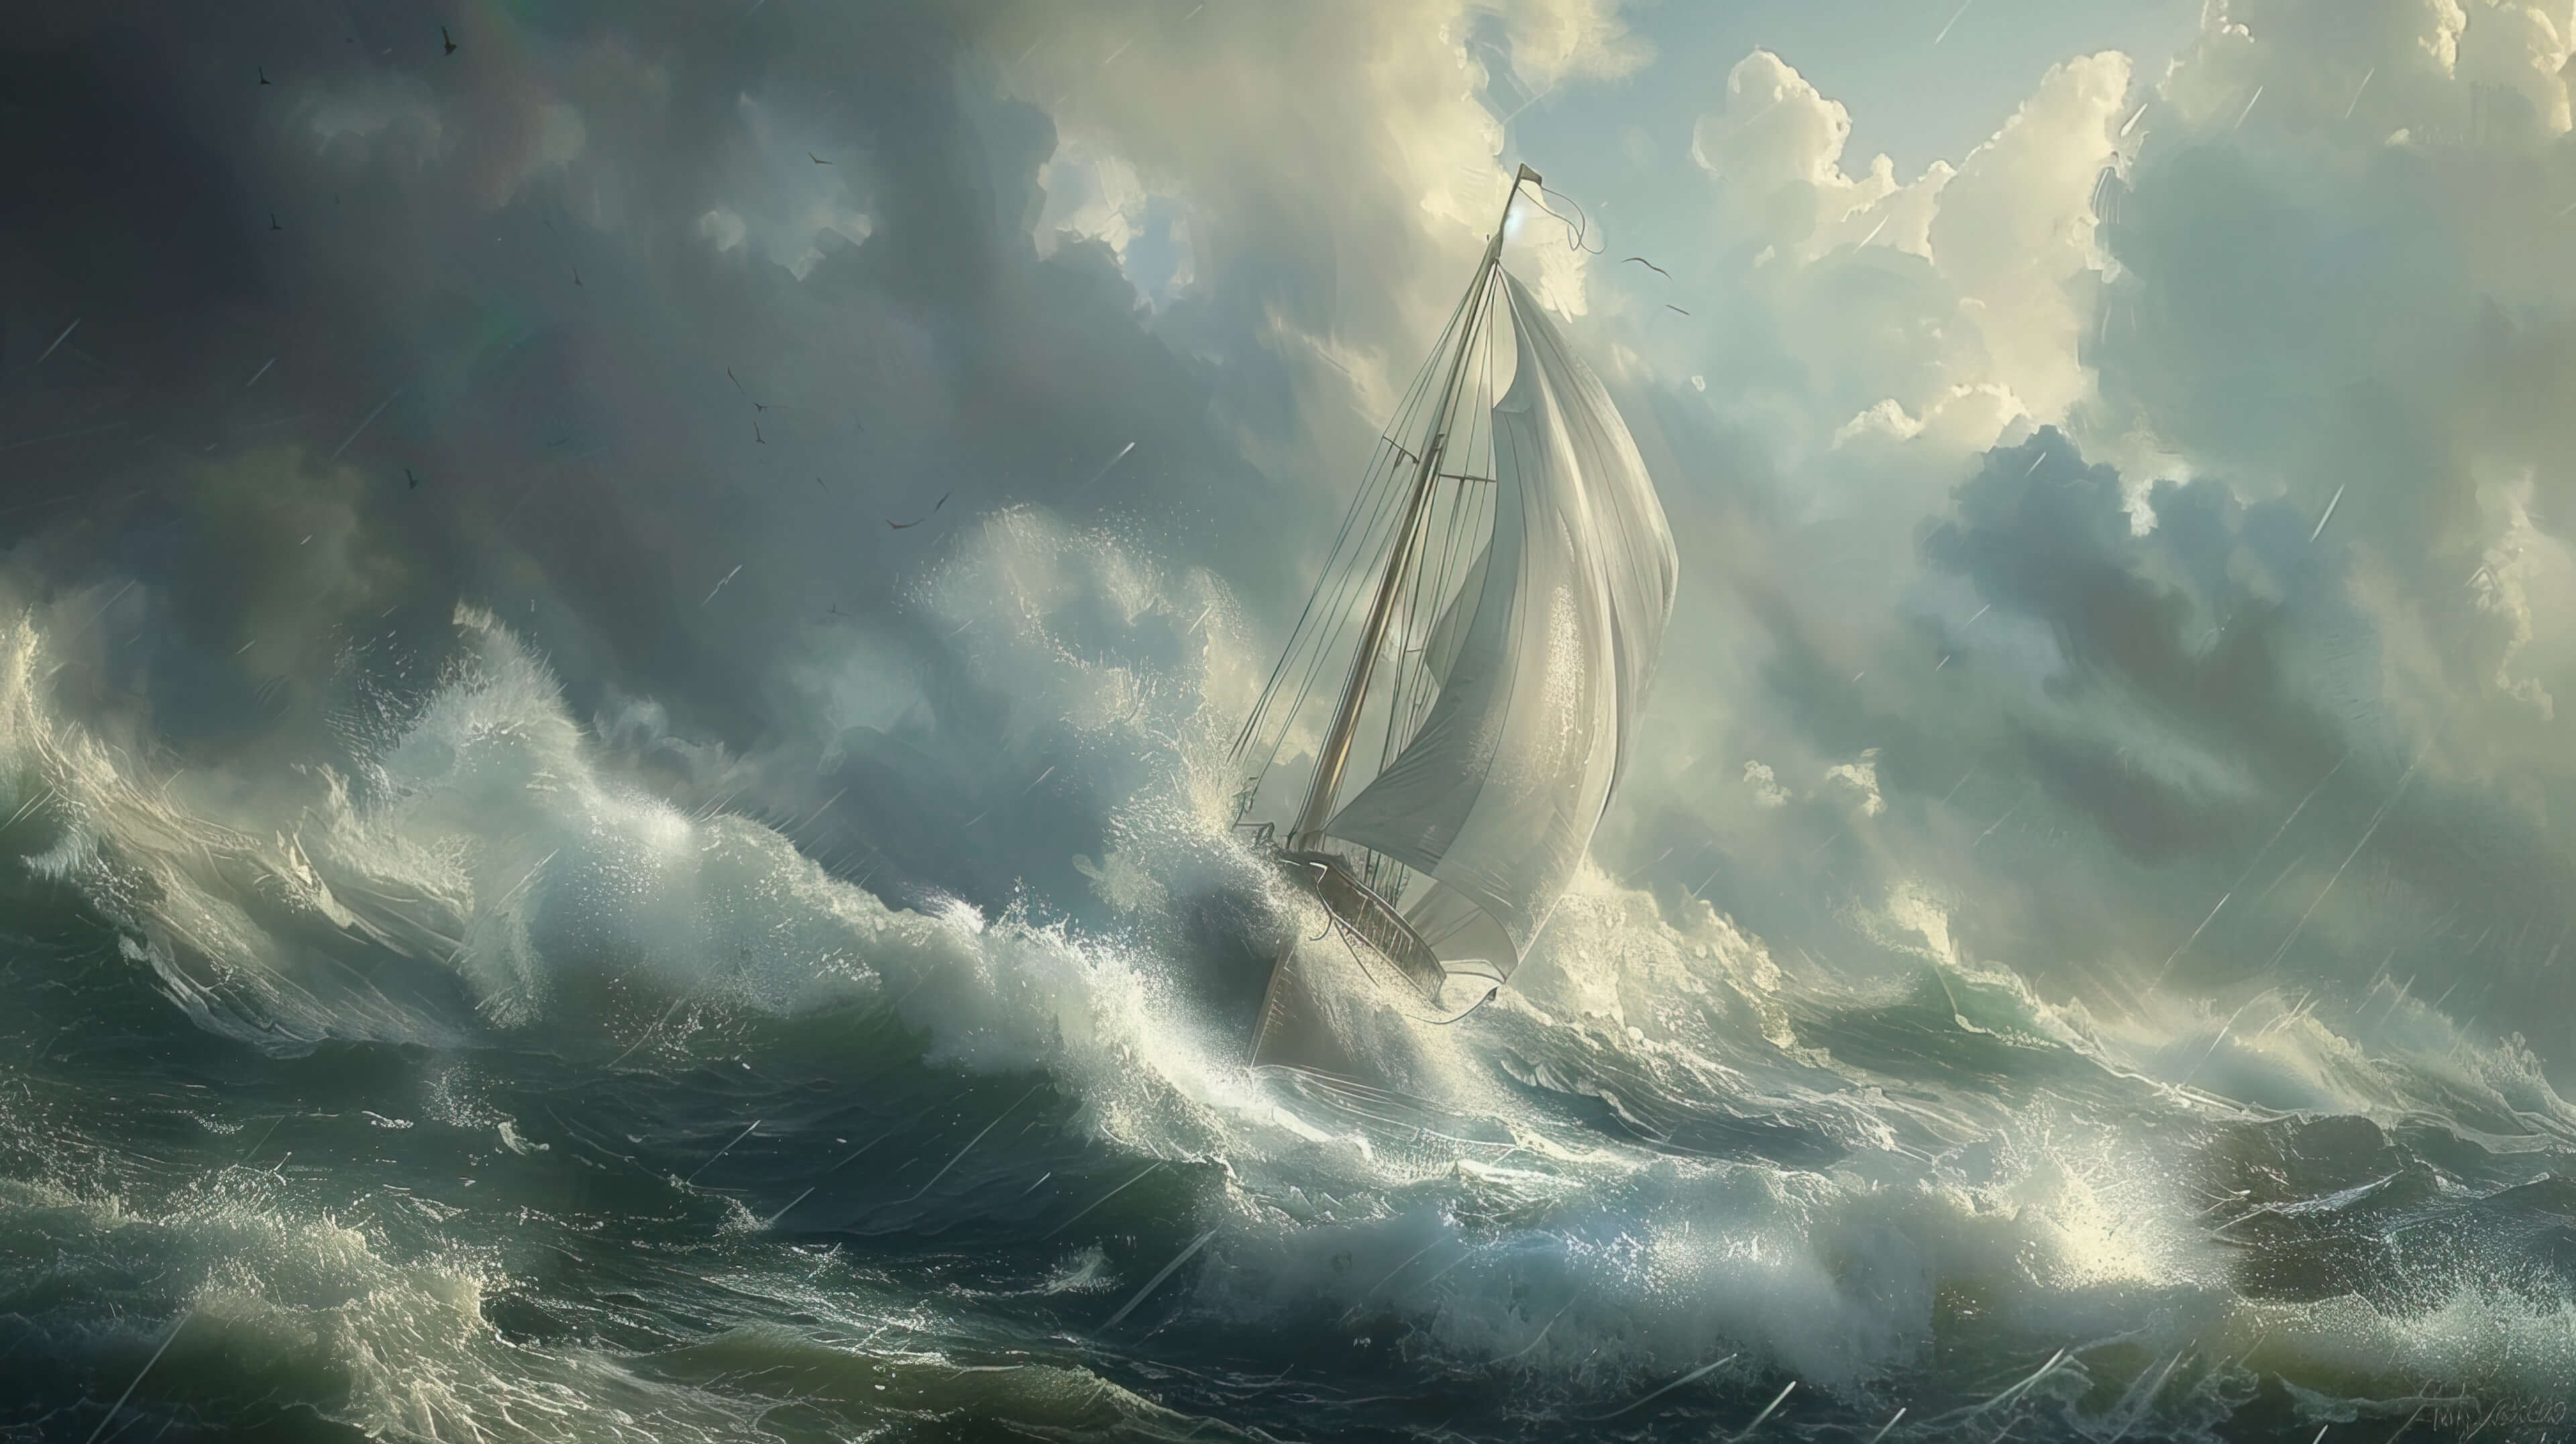 A thrilling wallpaper capturing a sailboat battling through turbulent seas its crew facing fierce waves and strong winds